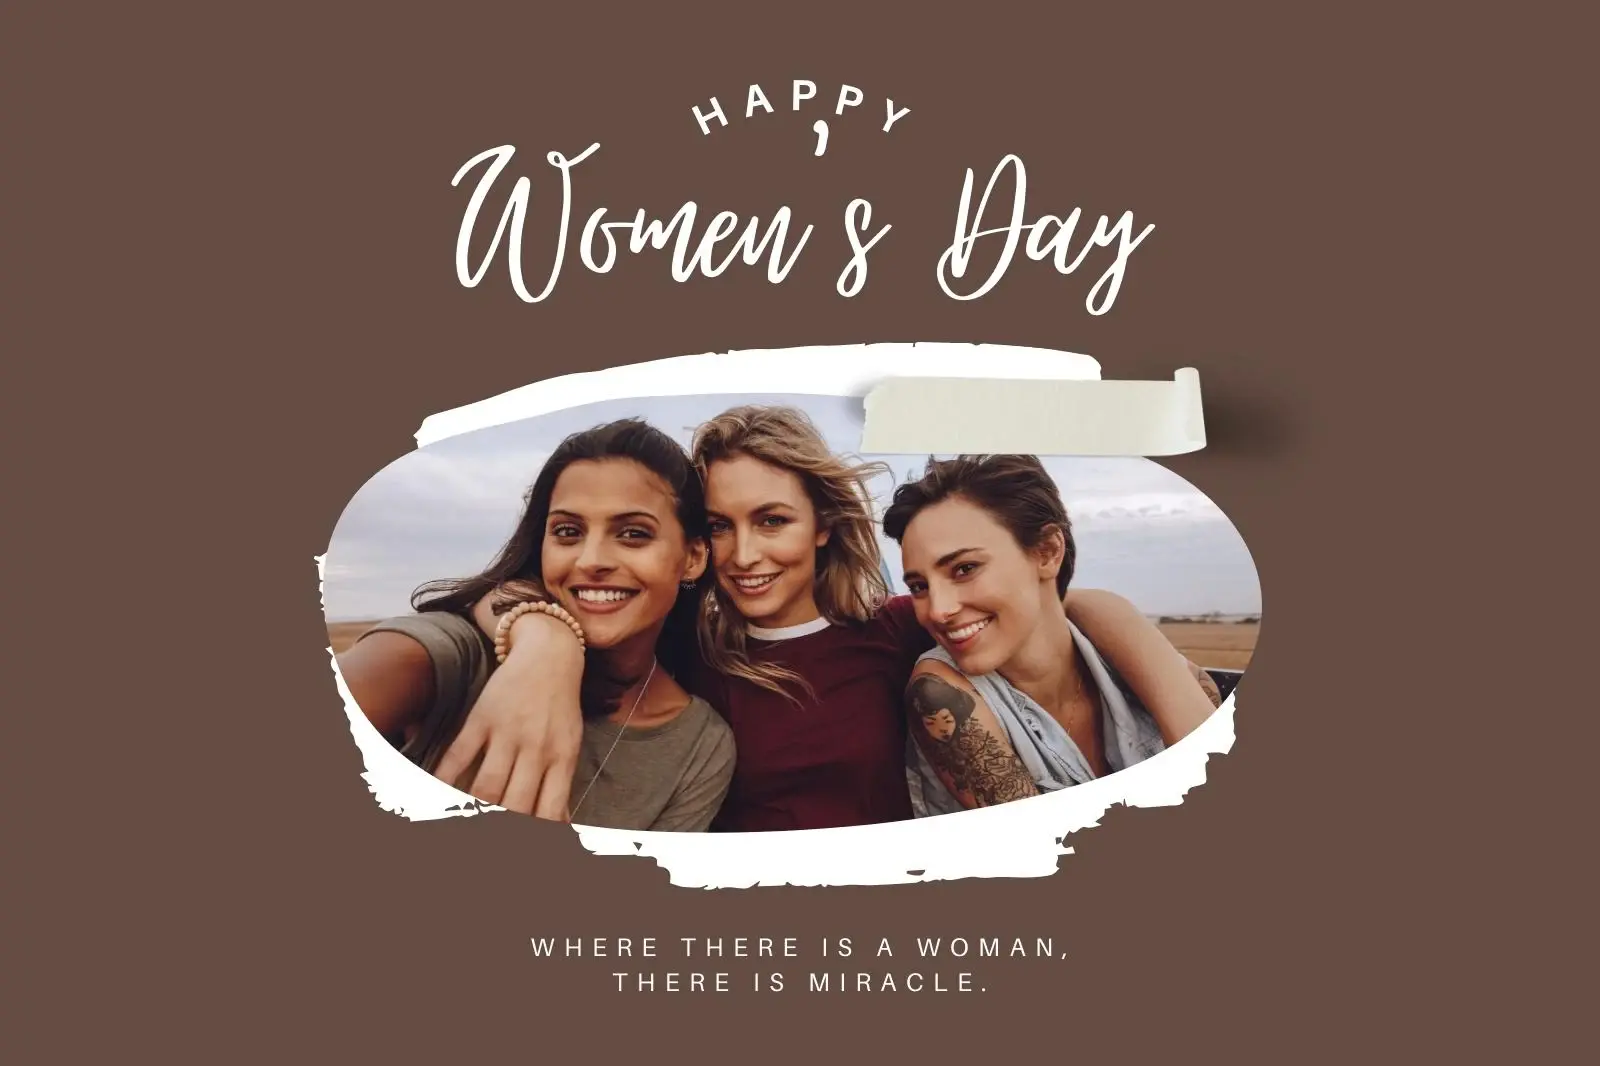 Women’s Day-themed Greetings/banners using Erase.bg Cut Outs